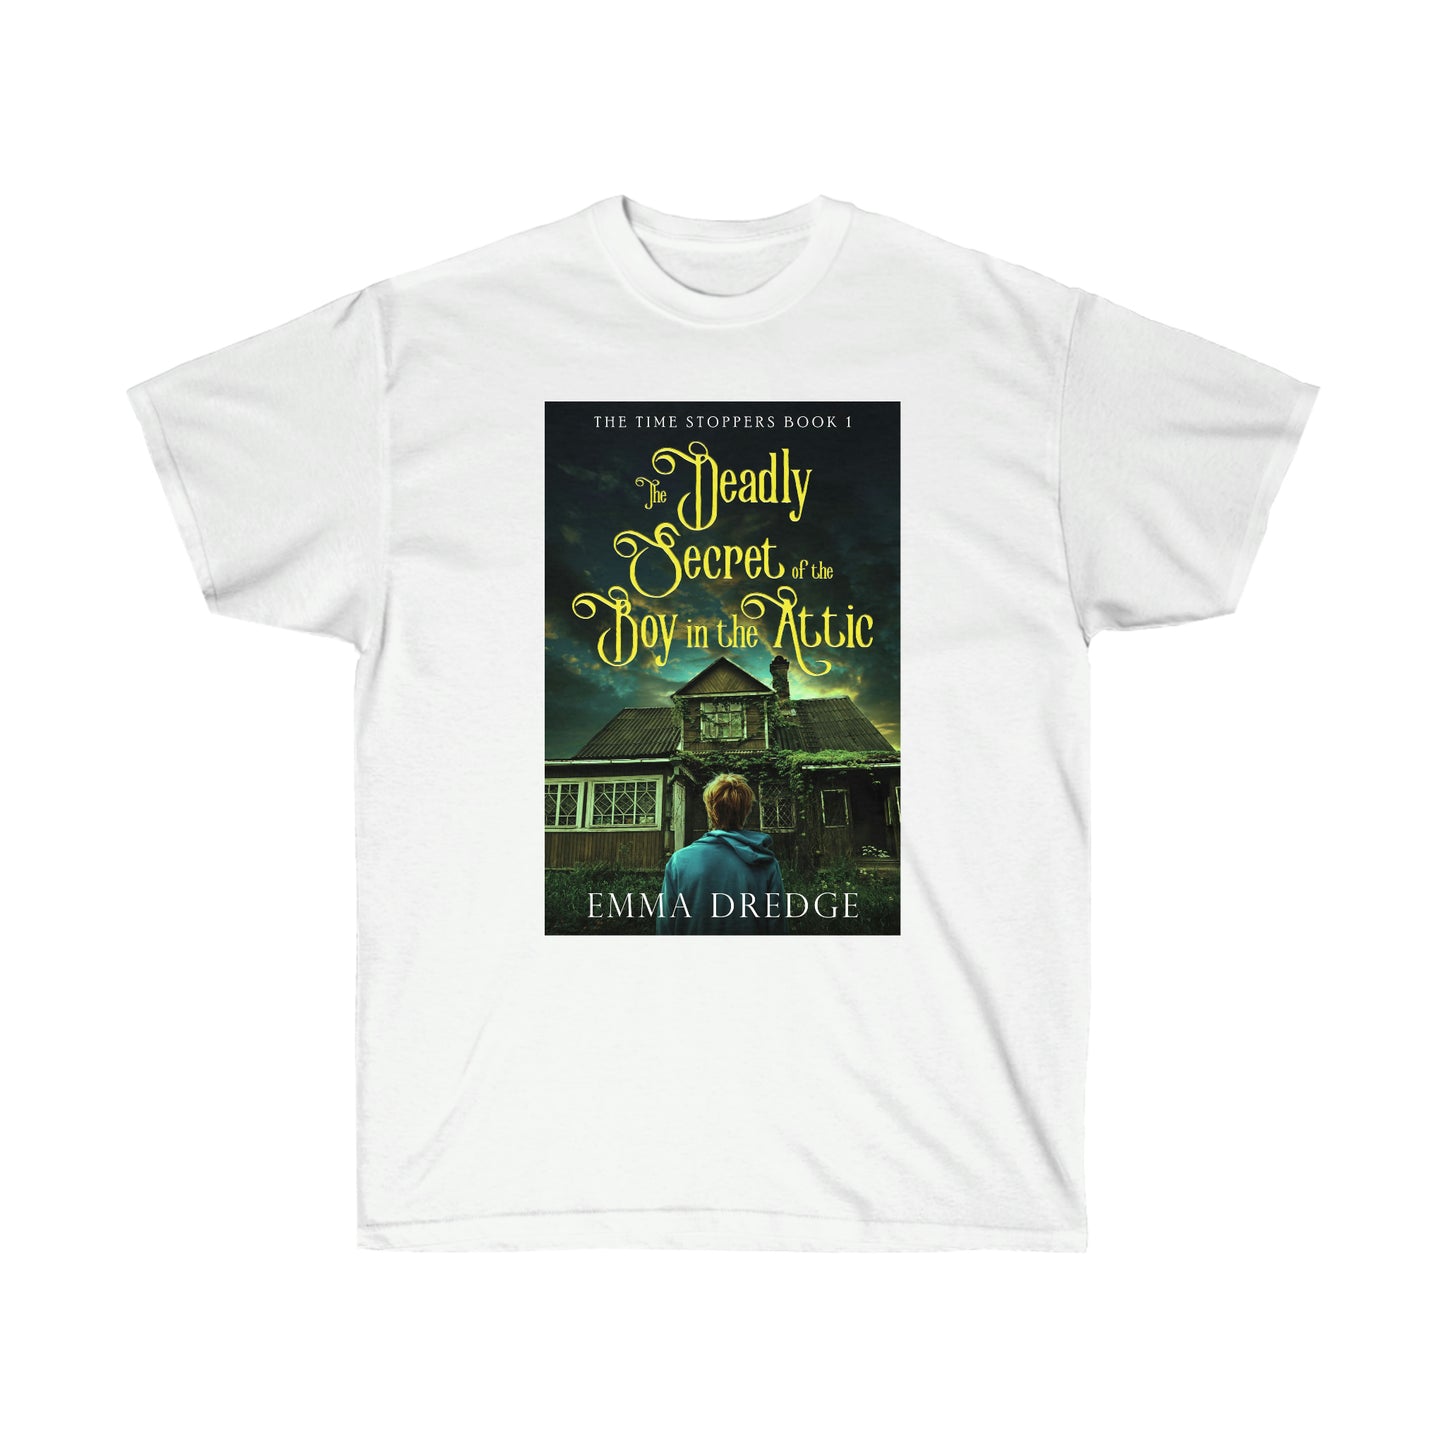 The Deadly Secret of the Boy in the Attic - Unisex T-Shirt